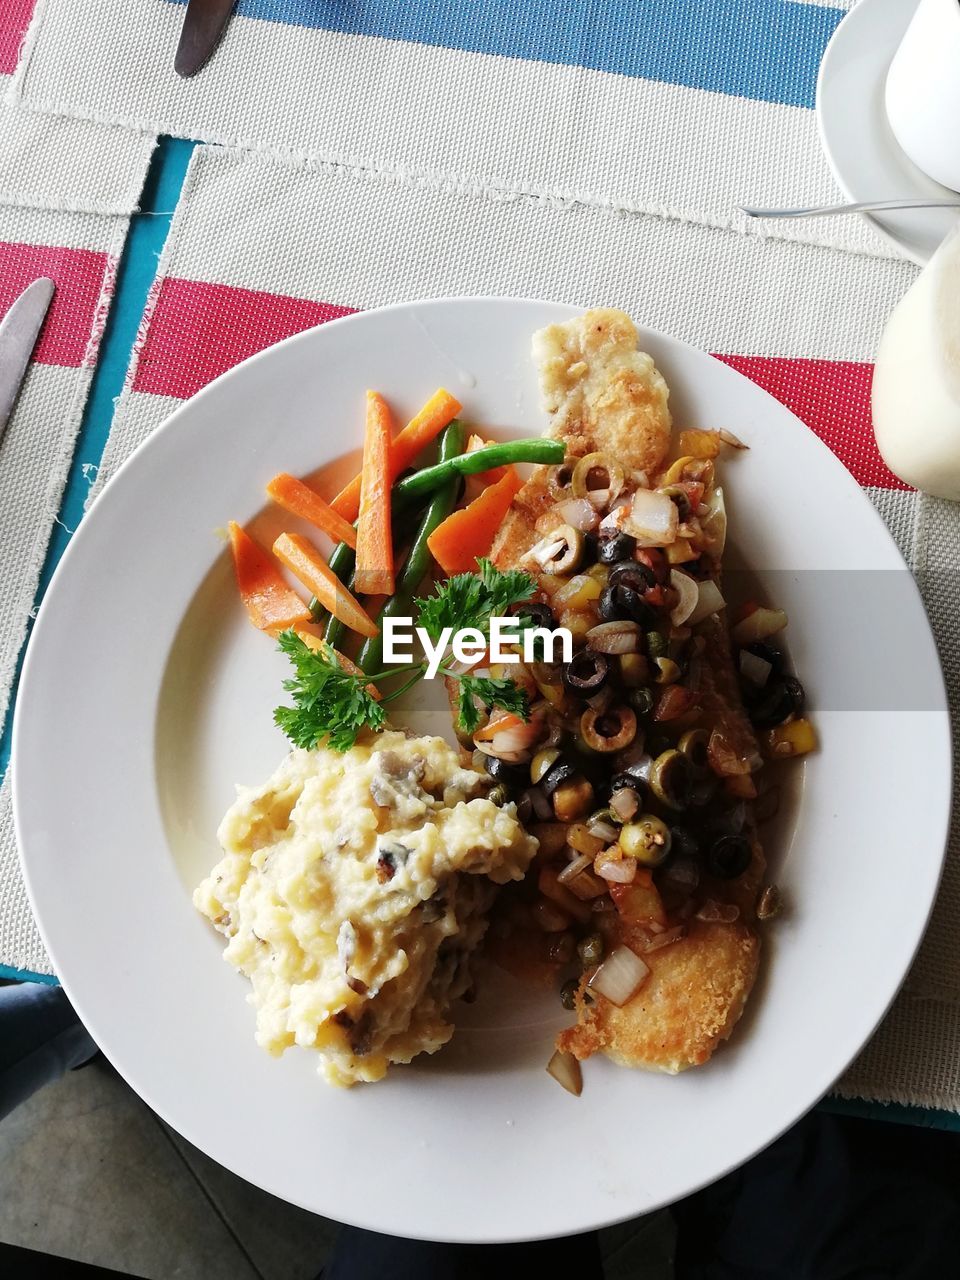 HIGH ANGLE VIEW OF BREAKFAST SERVED ON PLATE